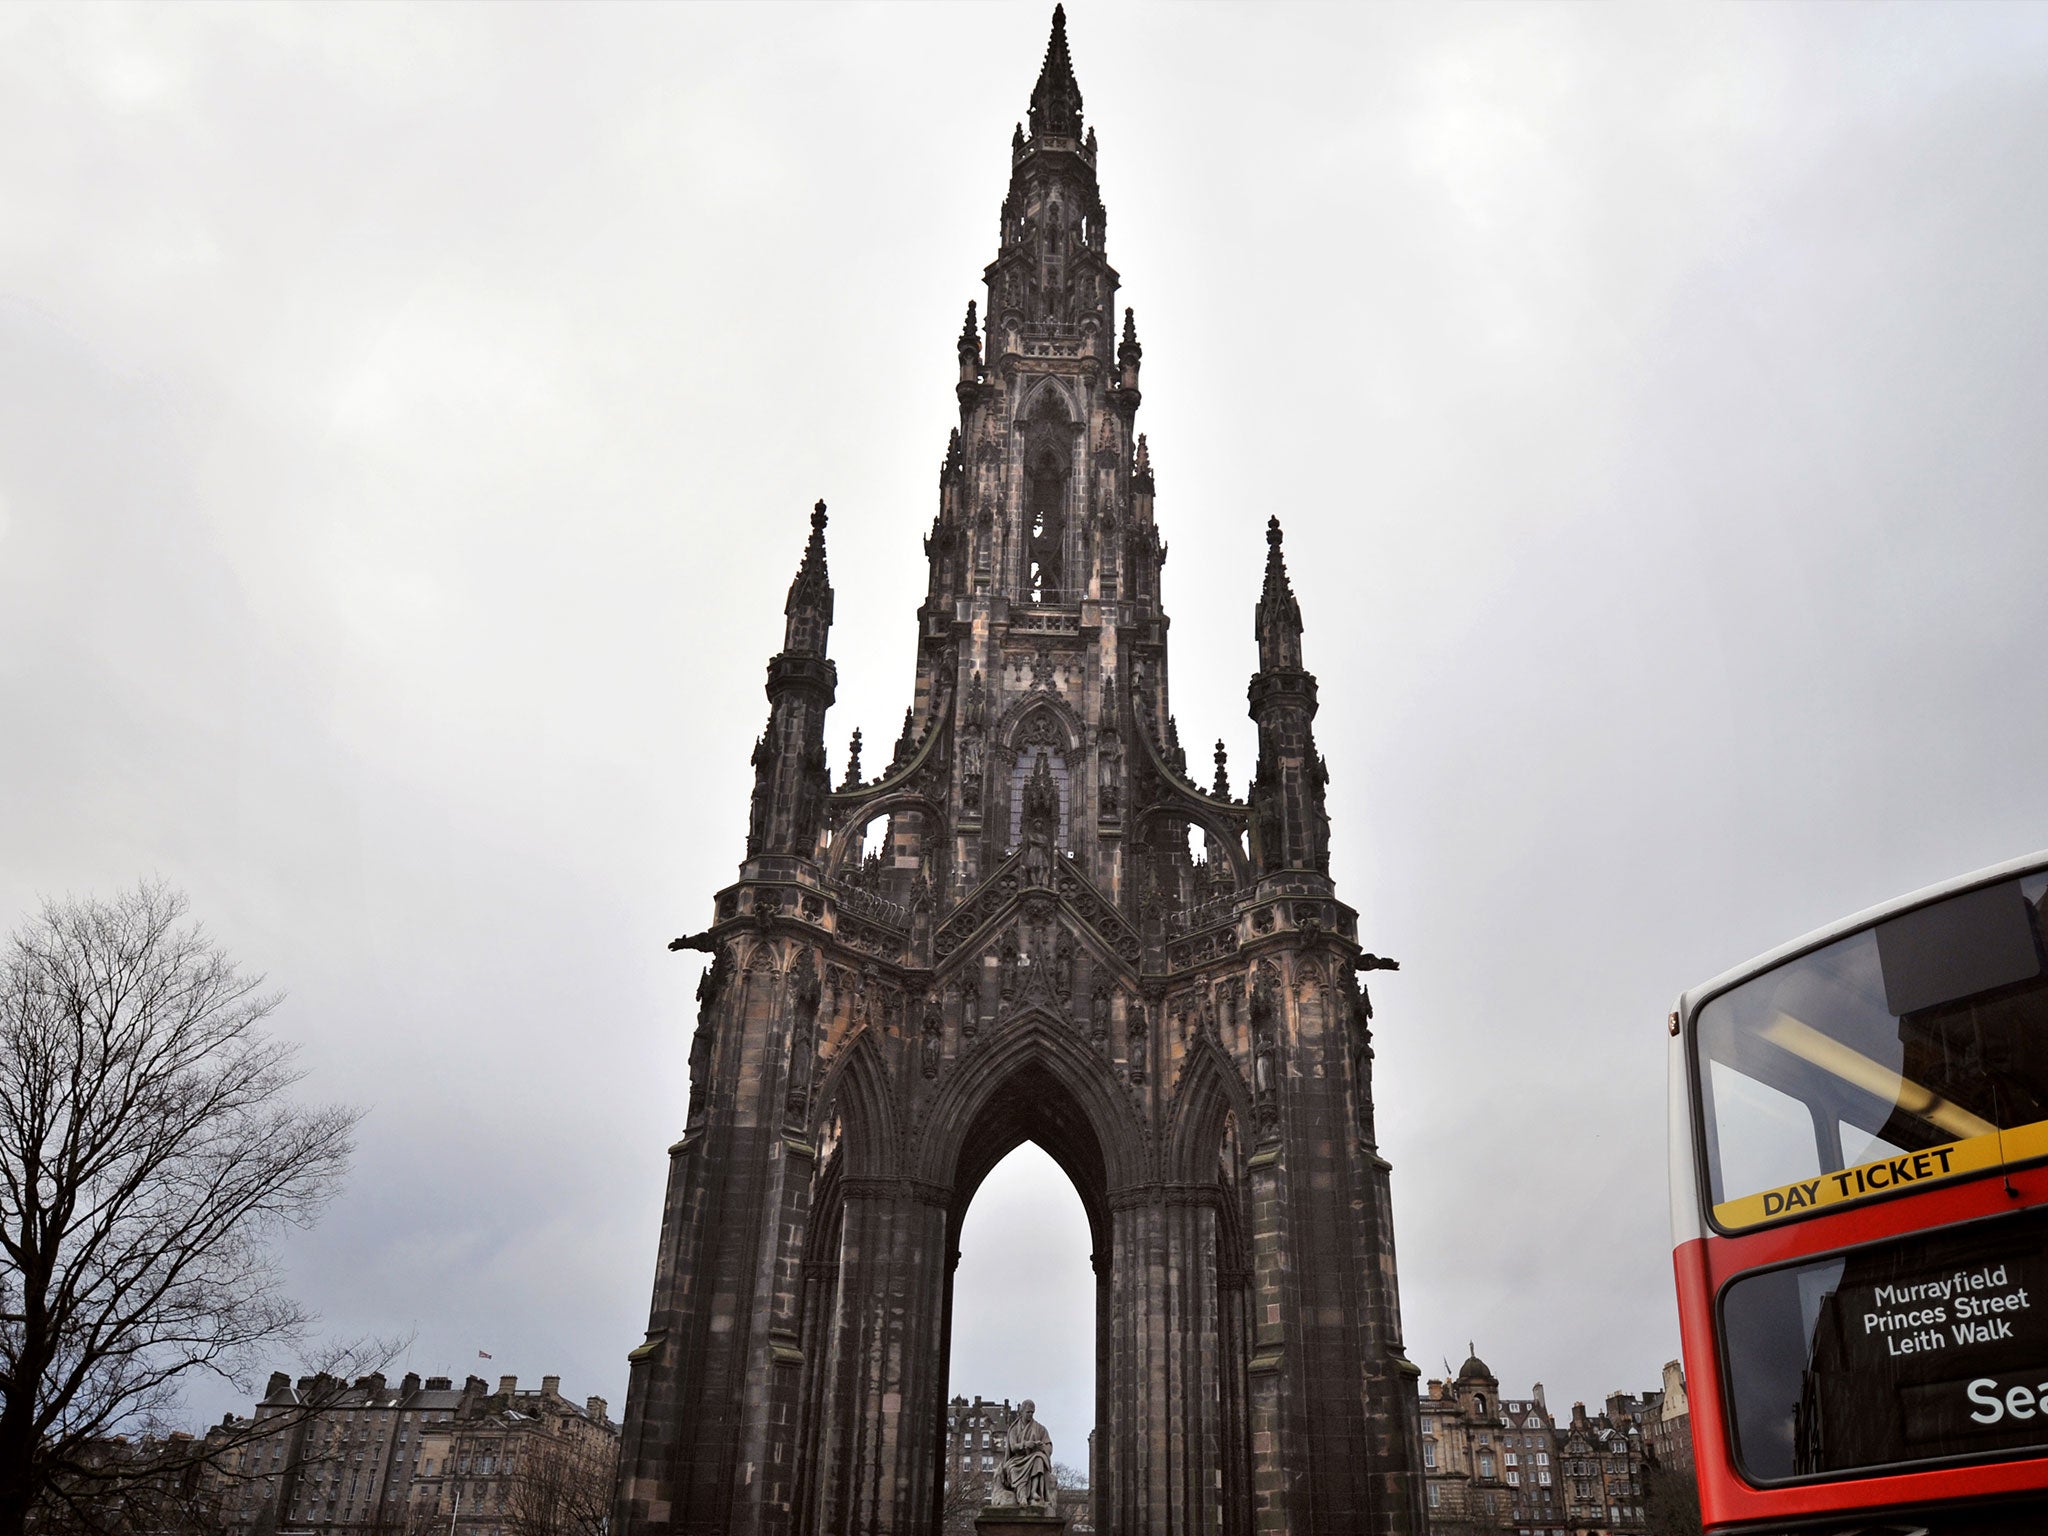 A picture taken on 8 February 2010 in Edinburgh of the Scott Monument